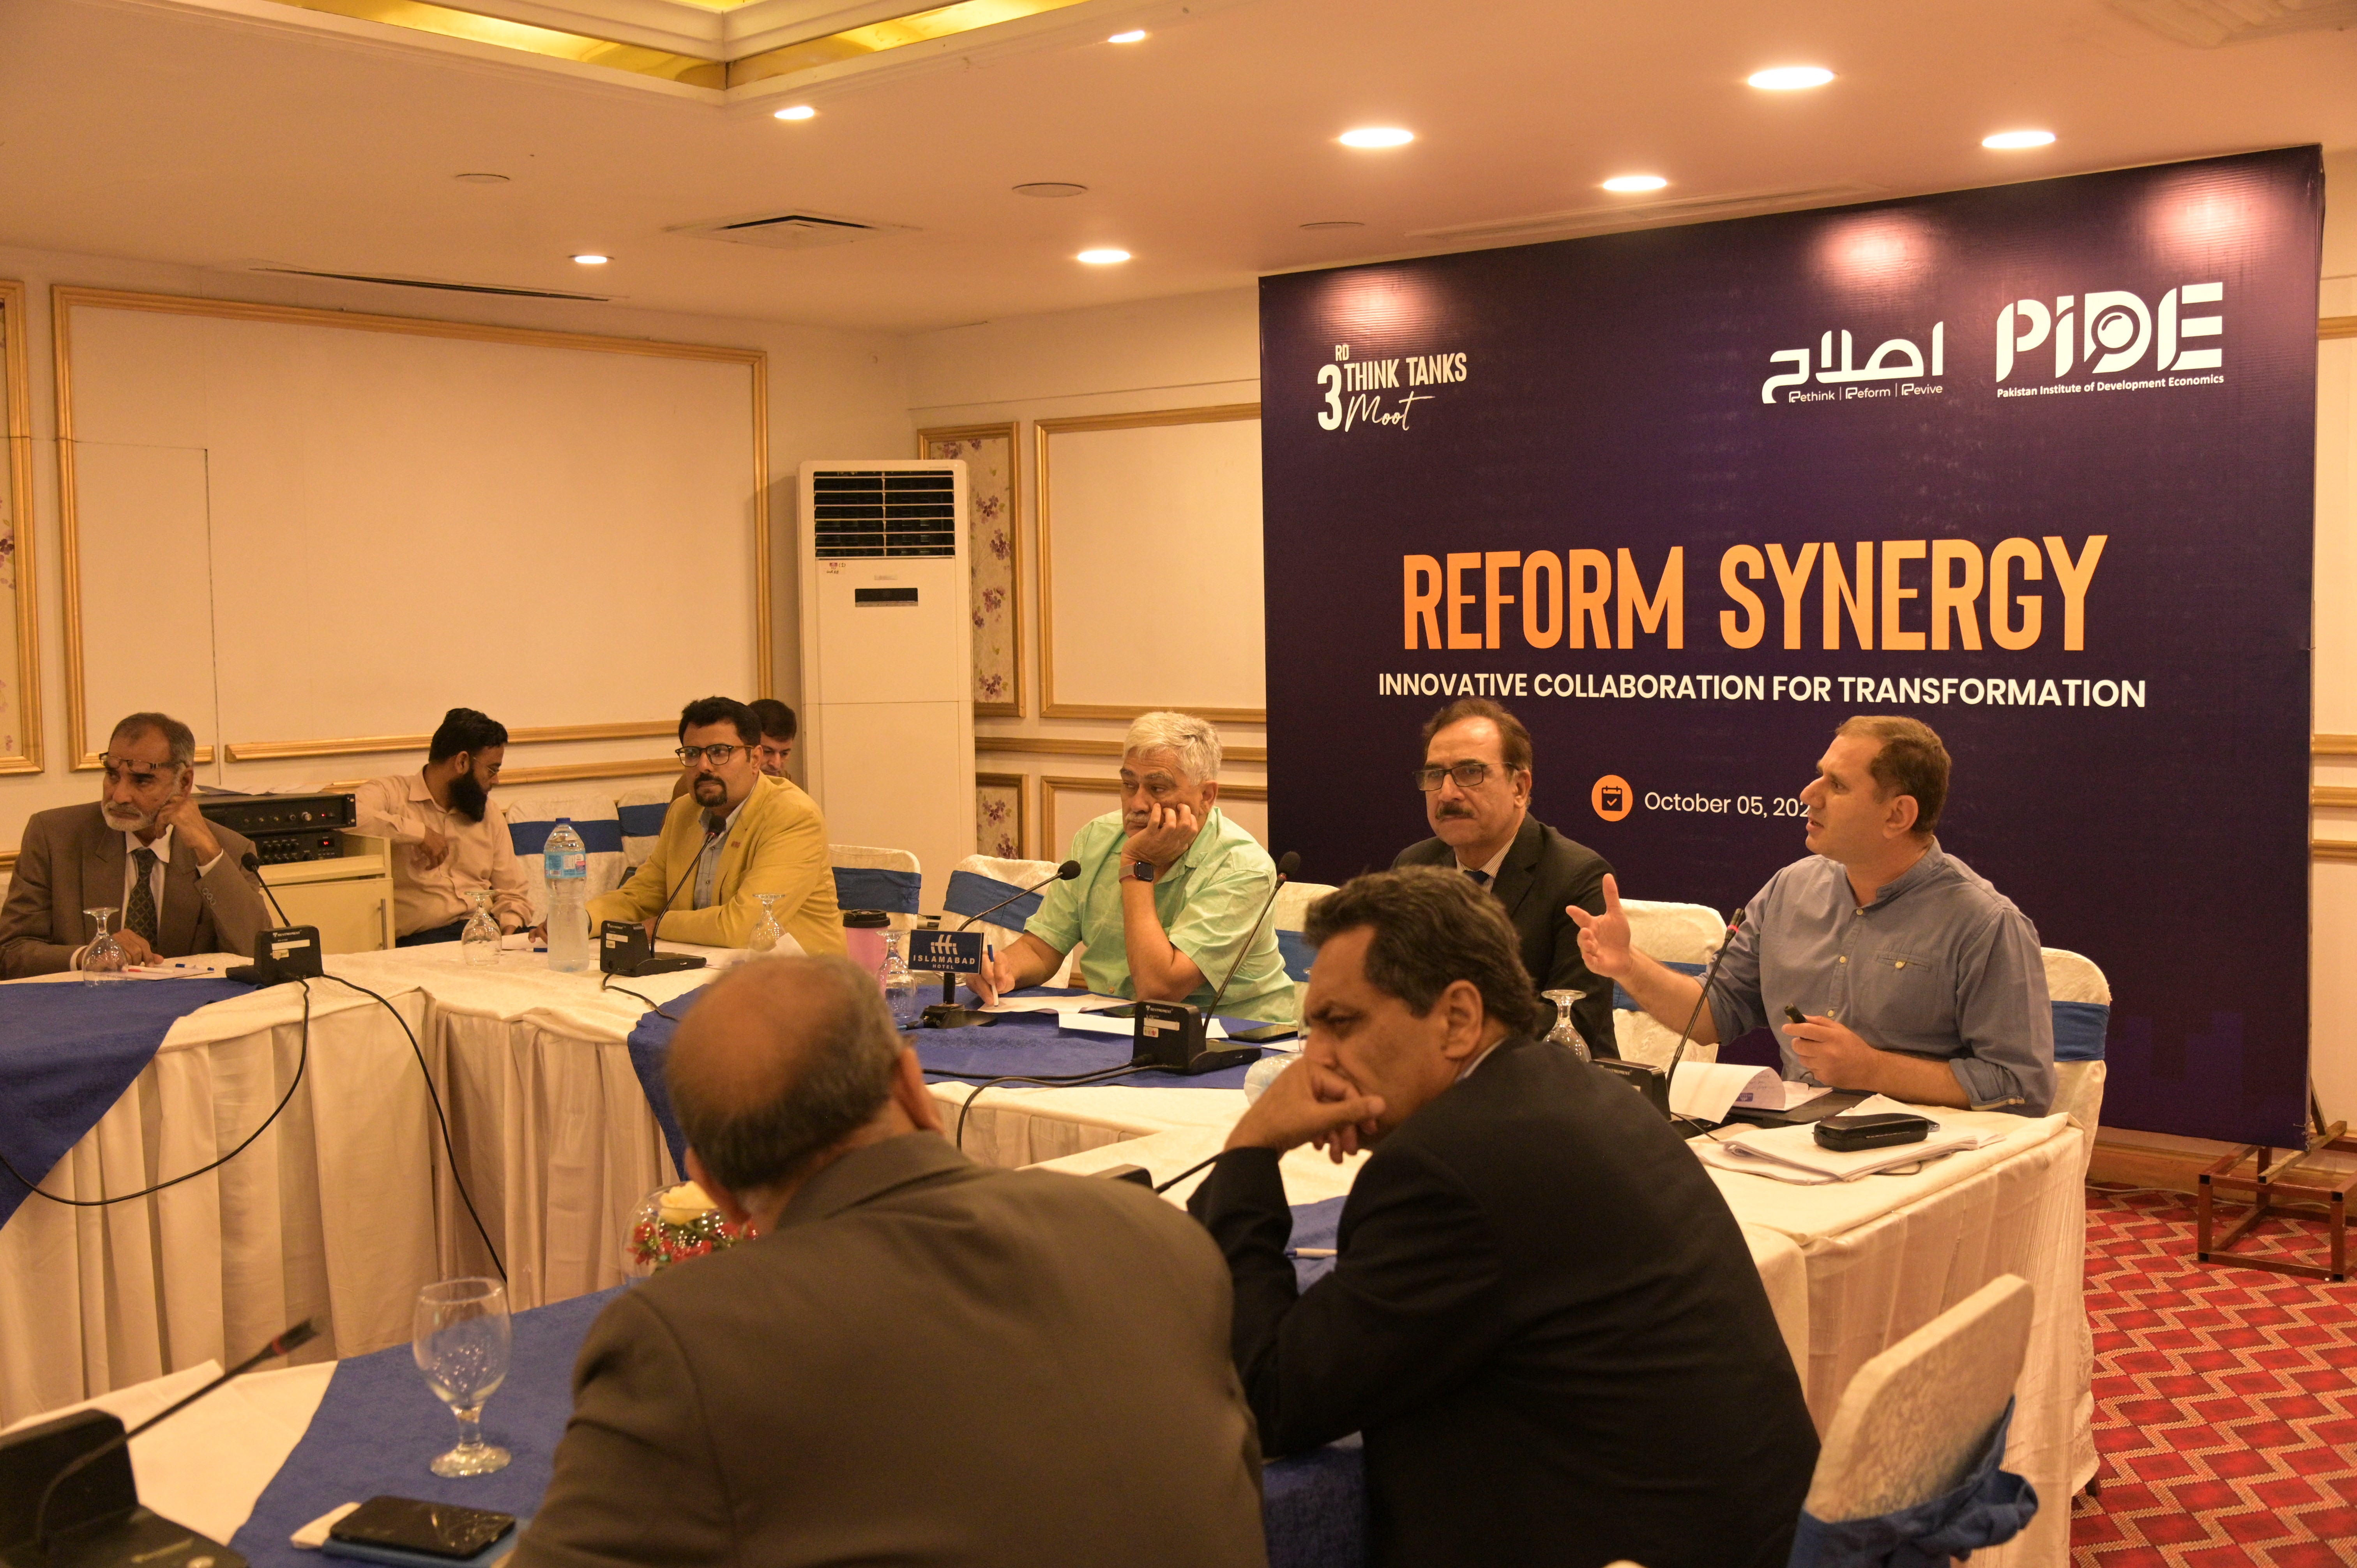 Panel discussion on reform synergy organized by PIDE with a theme of innovative collaboration for transformation